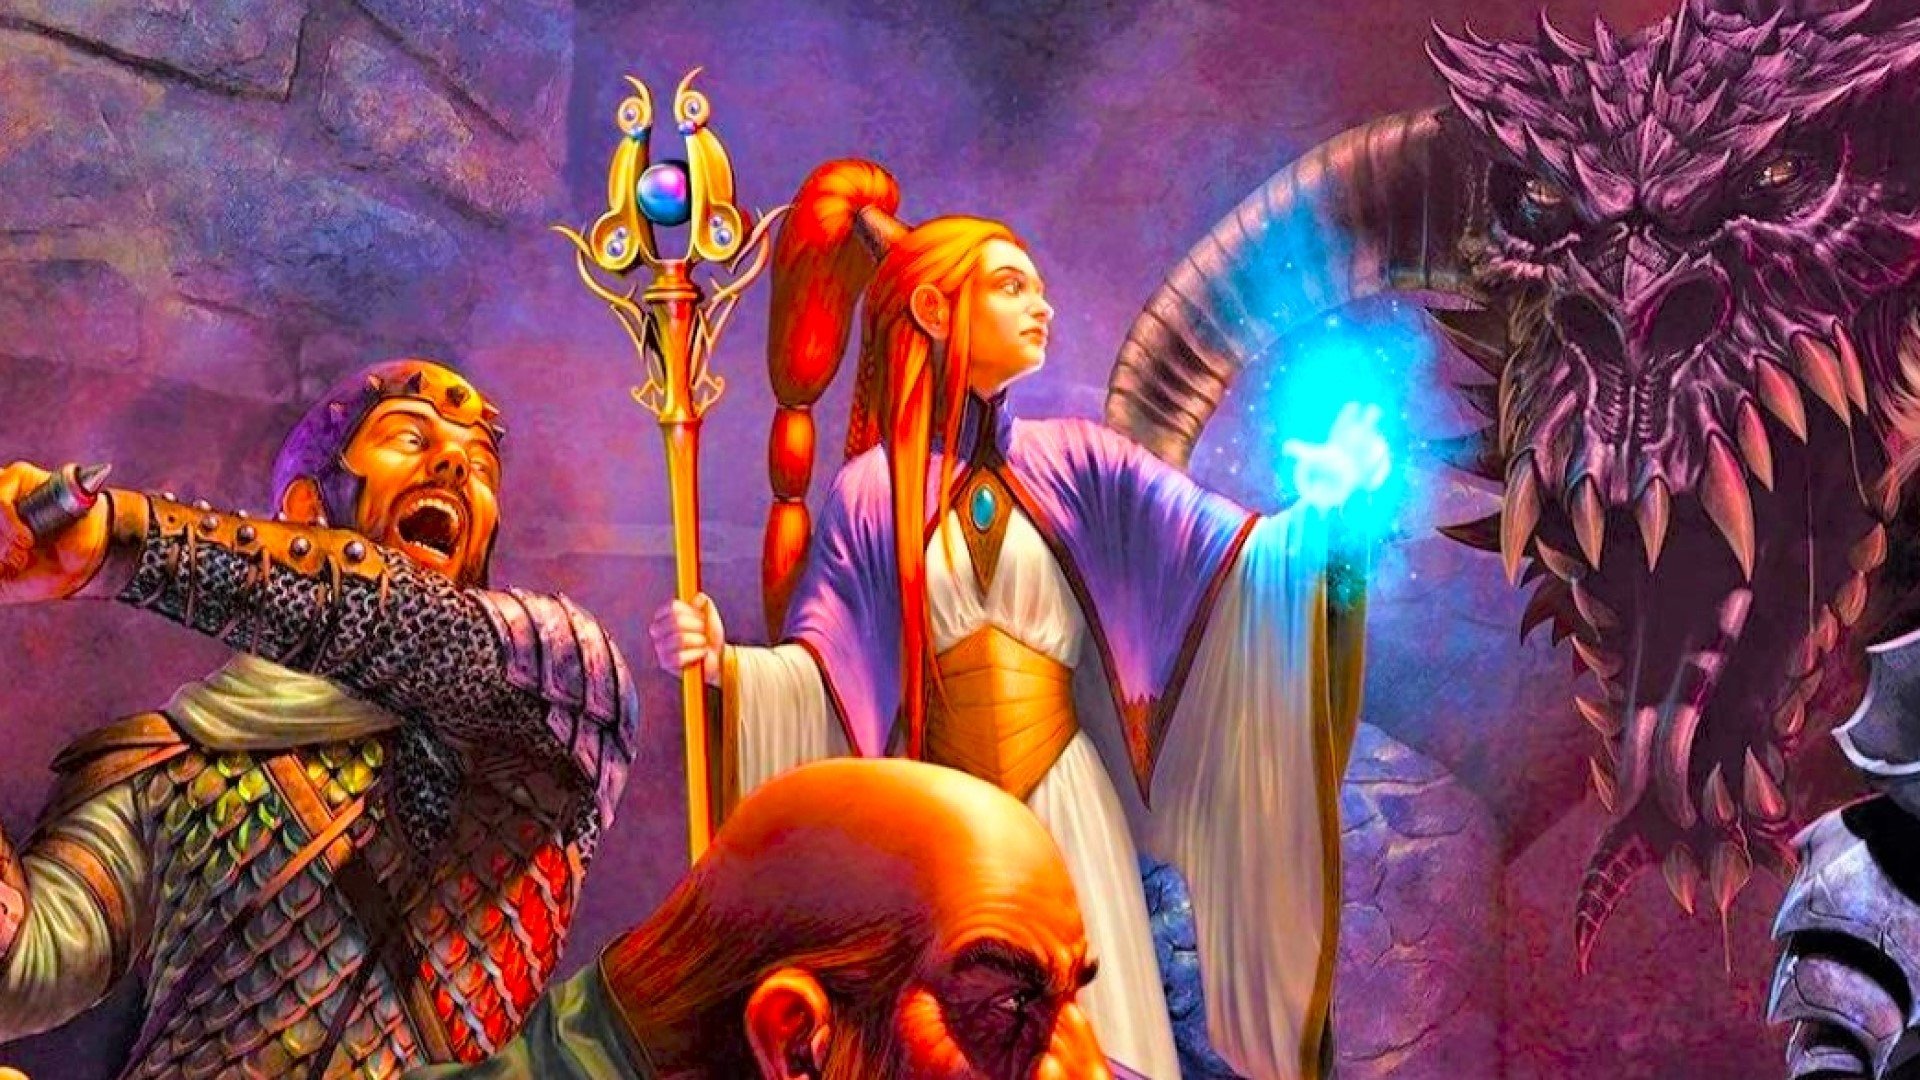 DnD hold person 5e - three fanatsy adventurers; the top of a ginger dwarf's head, a white human male in armour, and a ginger female wizard holding a staff and casting a magical blue flame